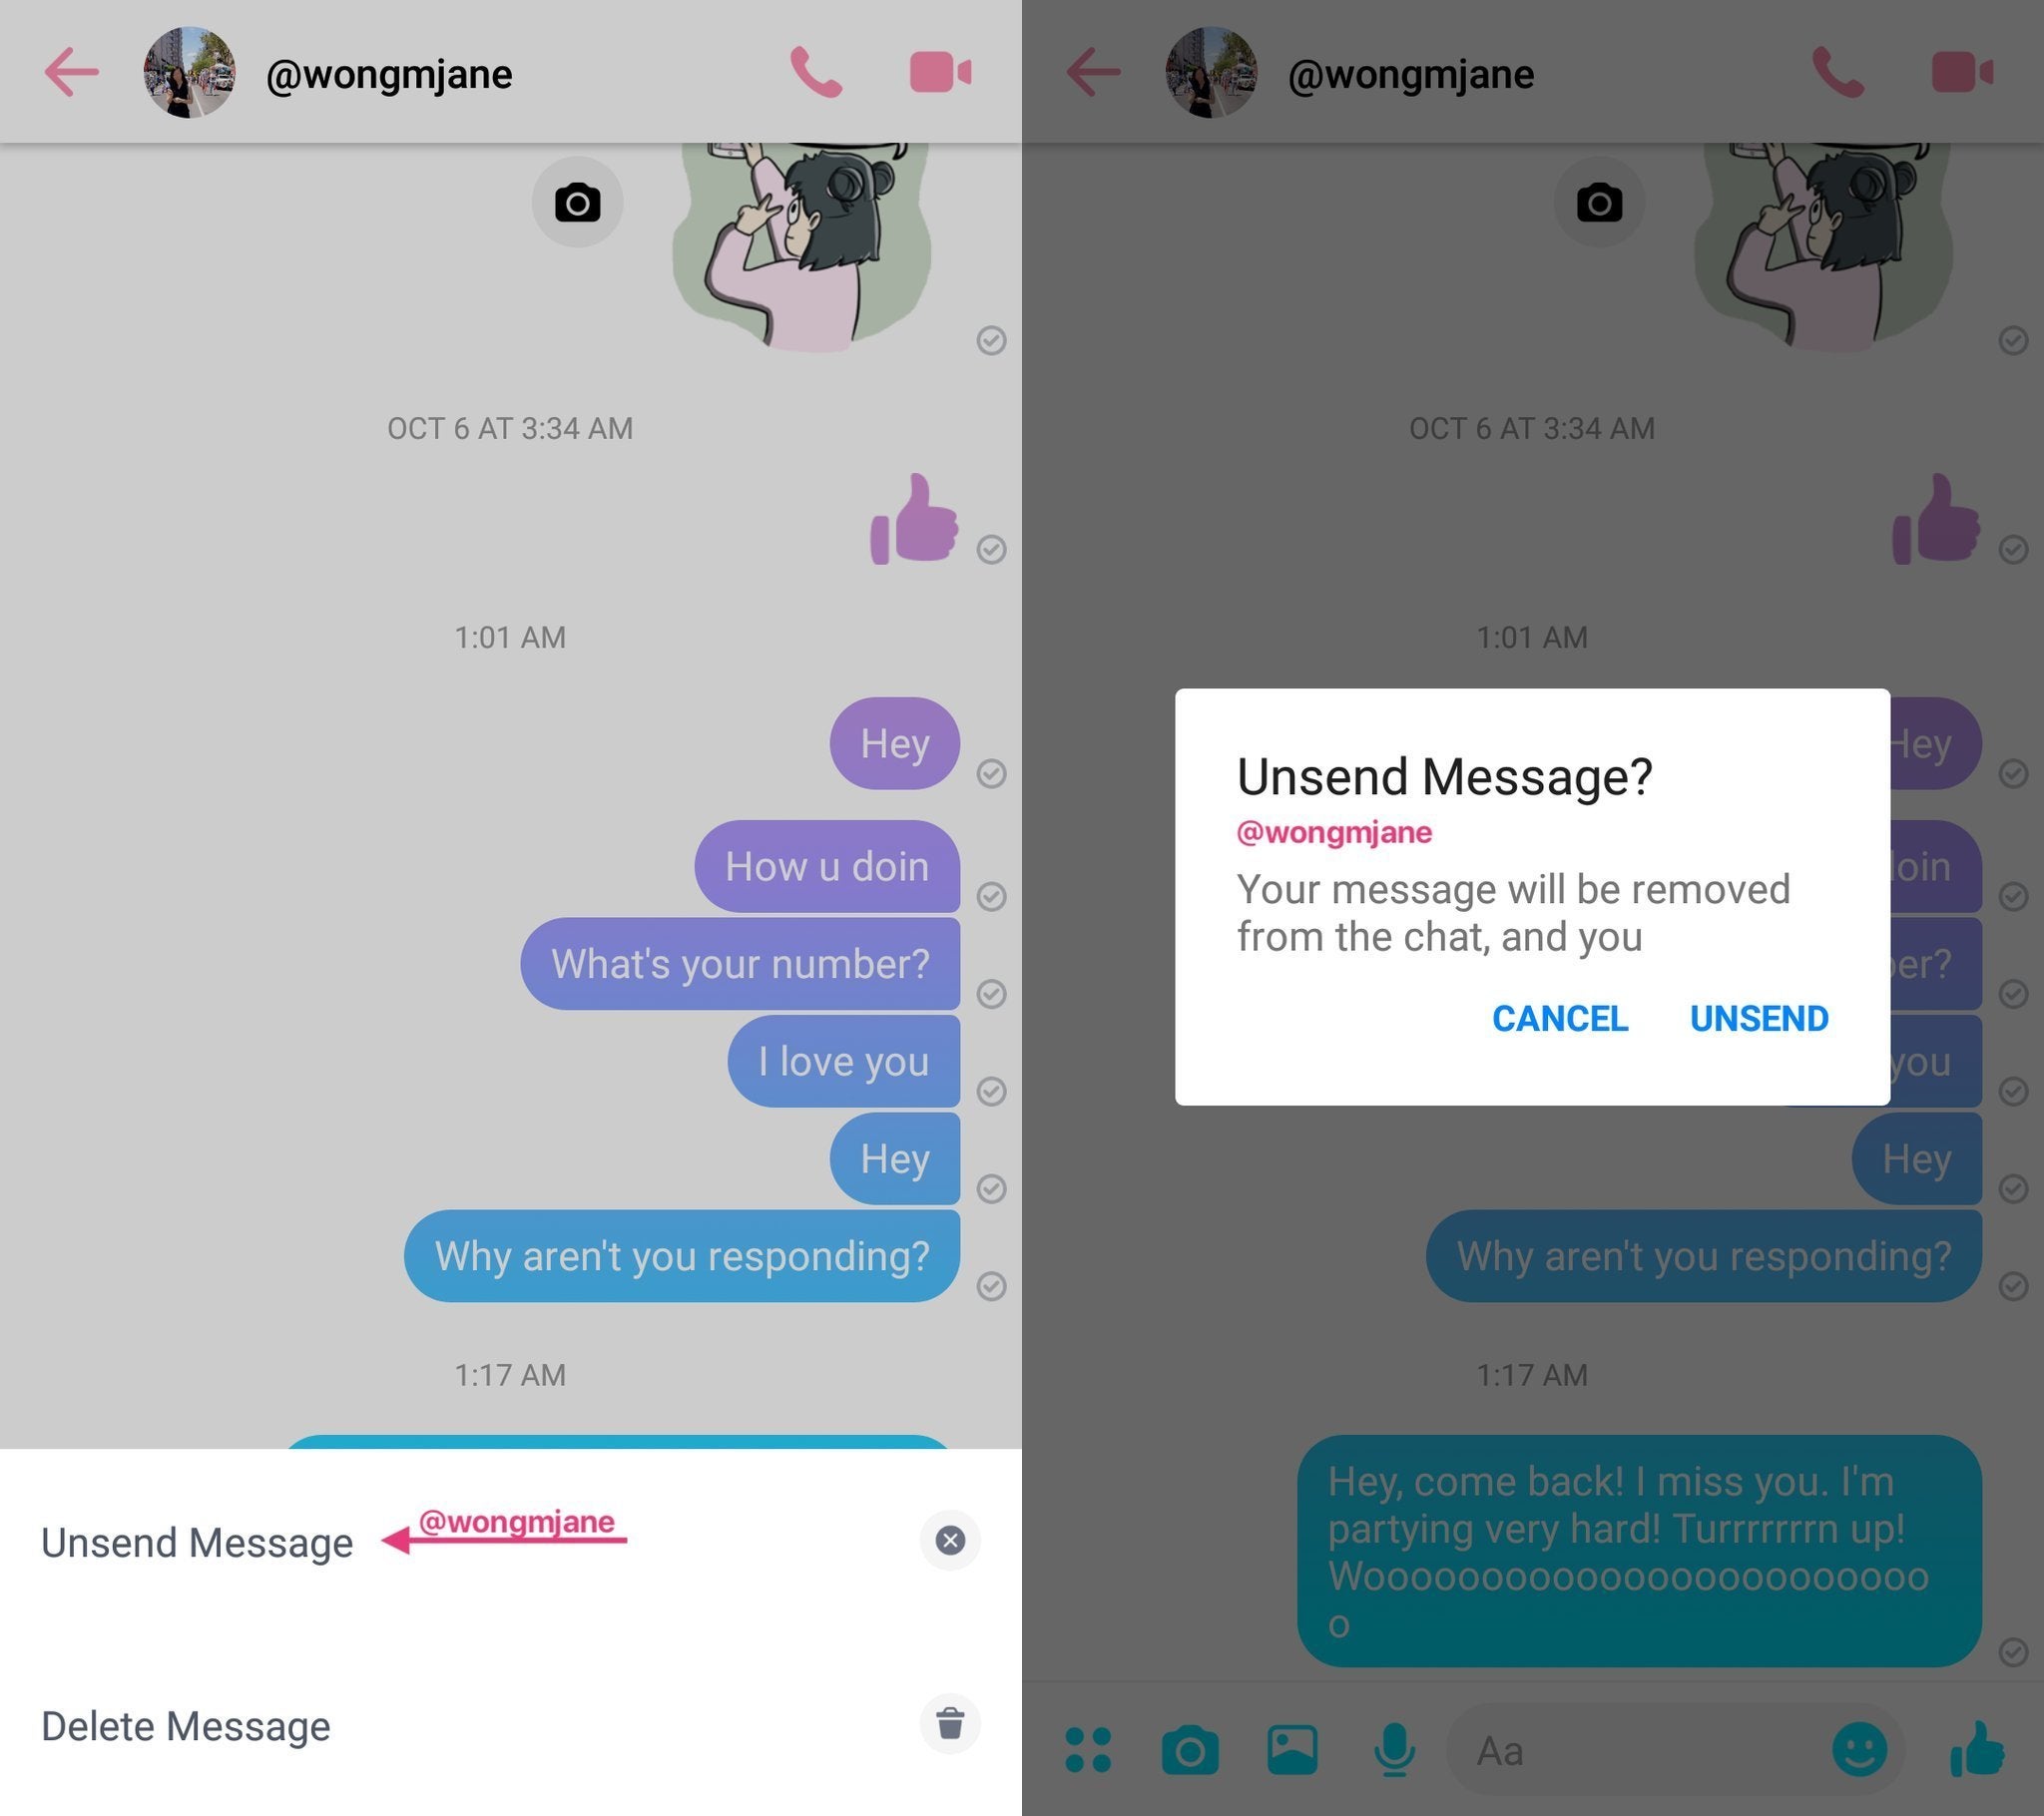 Facebook Messenger soon to add option to Unsend messages